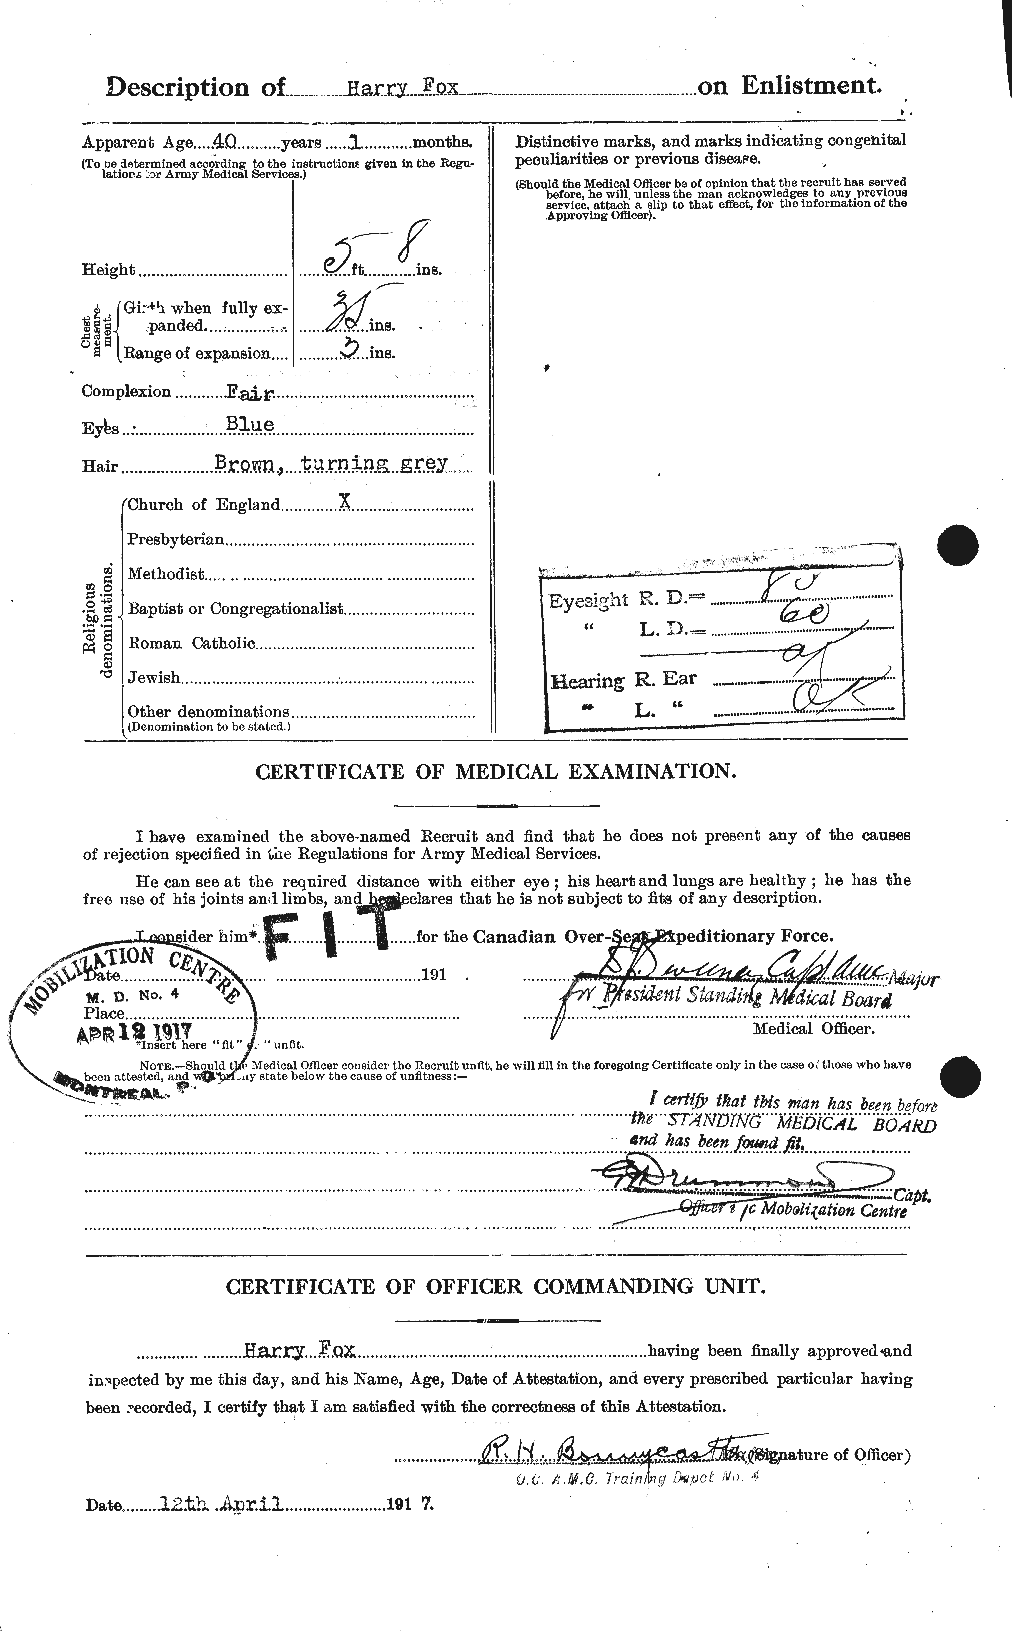 Personnel Records of the First World War - CEF 332509b